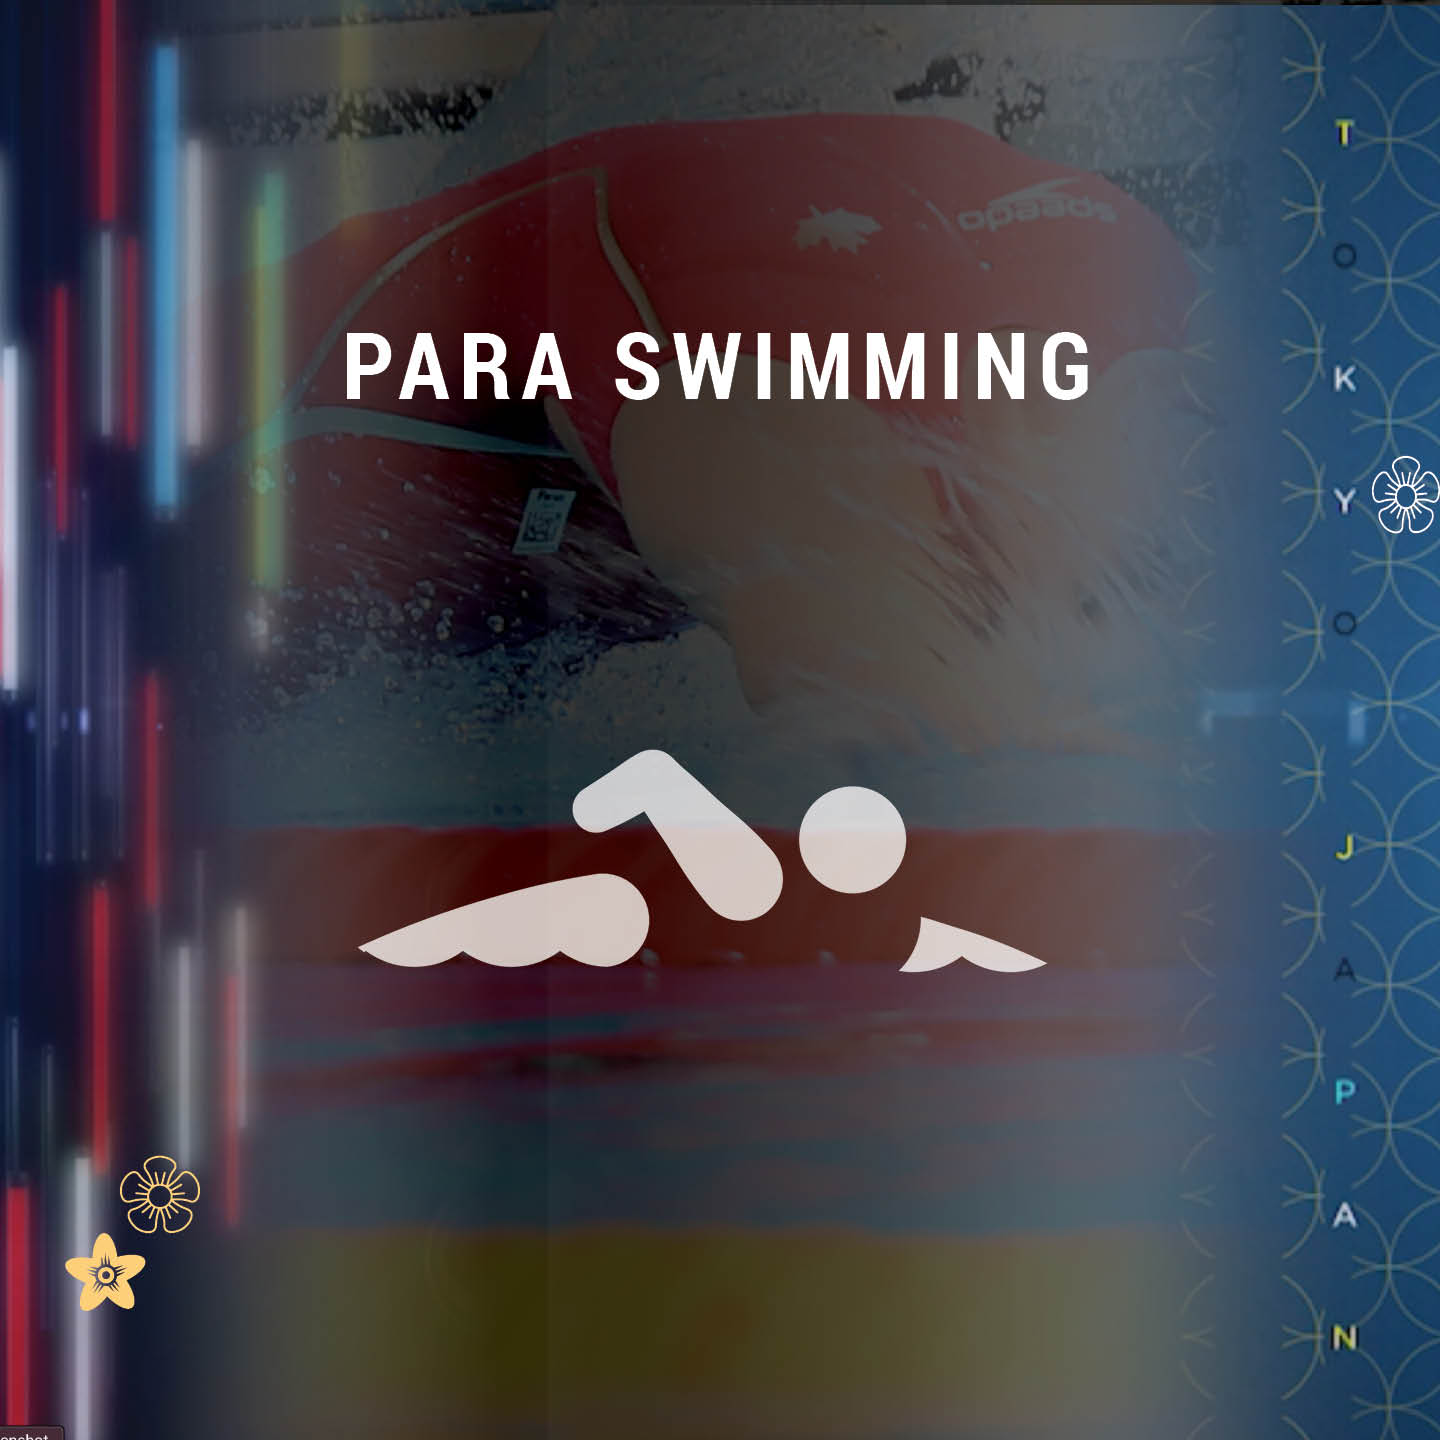 Para swimming Live stream and video on demand